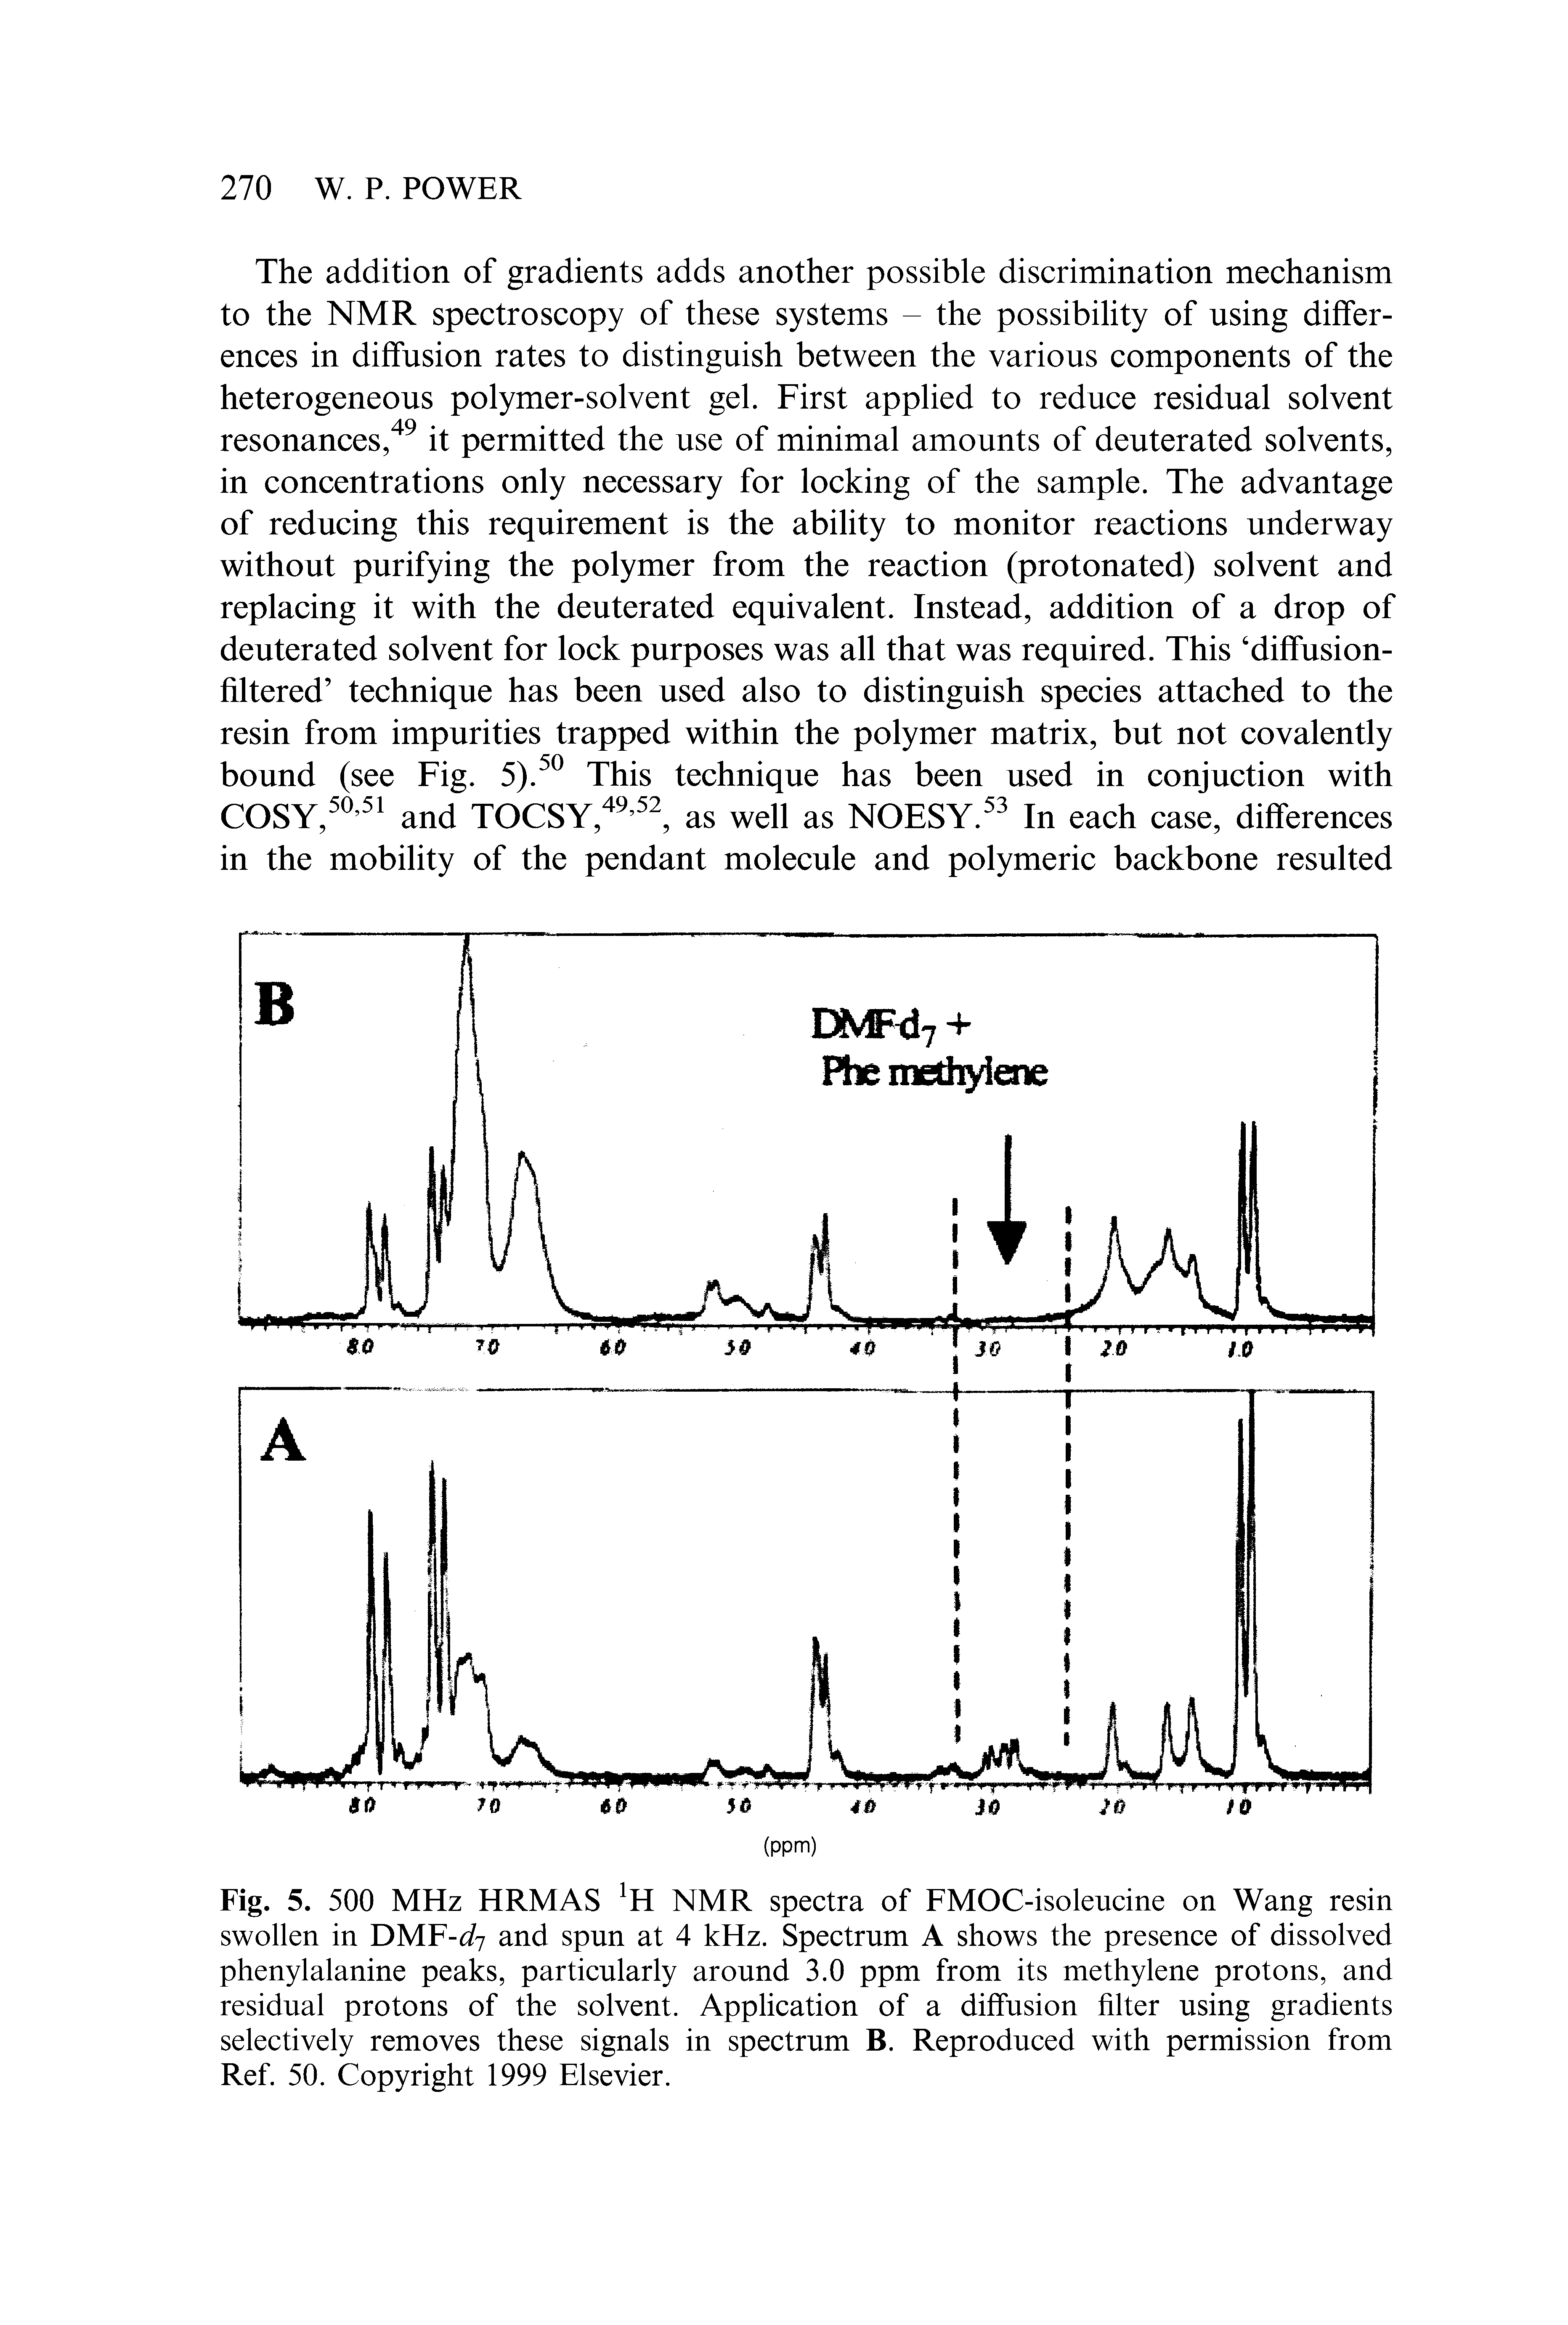 Fig. 5. 500 MHz HRMAS H NMR spectra of FMOC-isoleucine on Wang resin swollen in DMF- 7 and spun at 4 kHz. Spectrum A shows the presence of dissolved phenylalanine peaks, particularly around 3.0 ppm from its methylene protons, and residual protons of the solvent. Application of a diffusion filter using gradients selectively removes these signals in spectrum B. Reproduced with permission from Ref. 50. Copyright 1999 Elsevier.